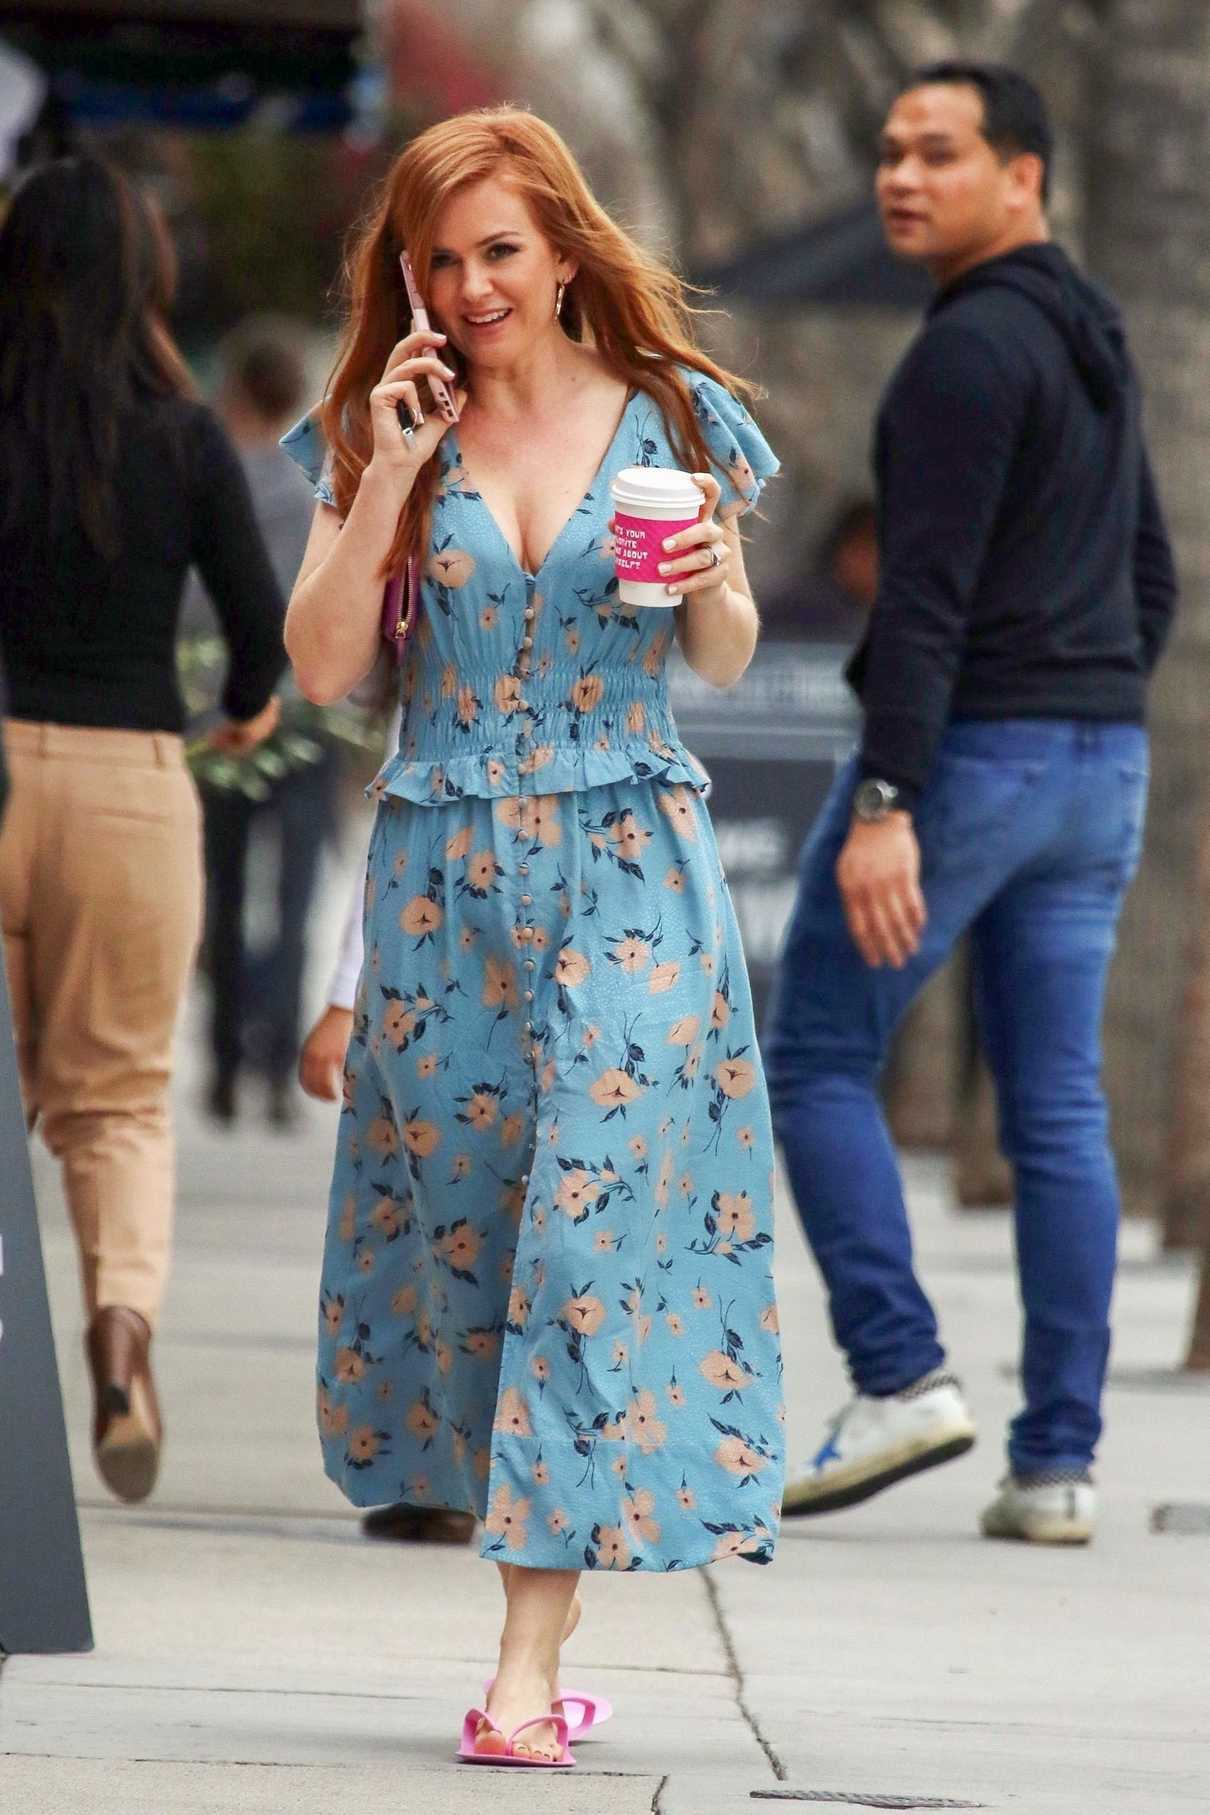 Isla Fisher in a Blue Floral Dress